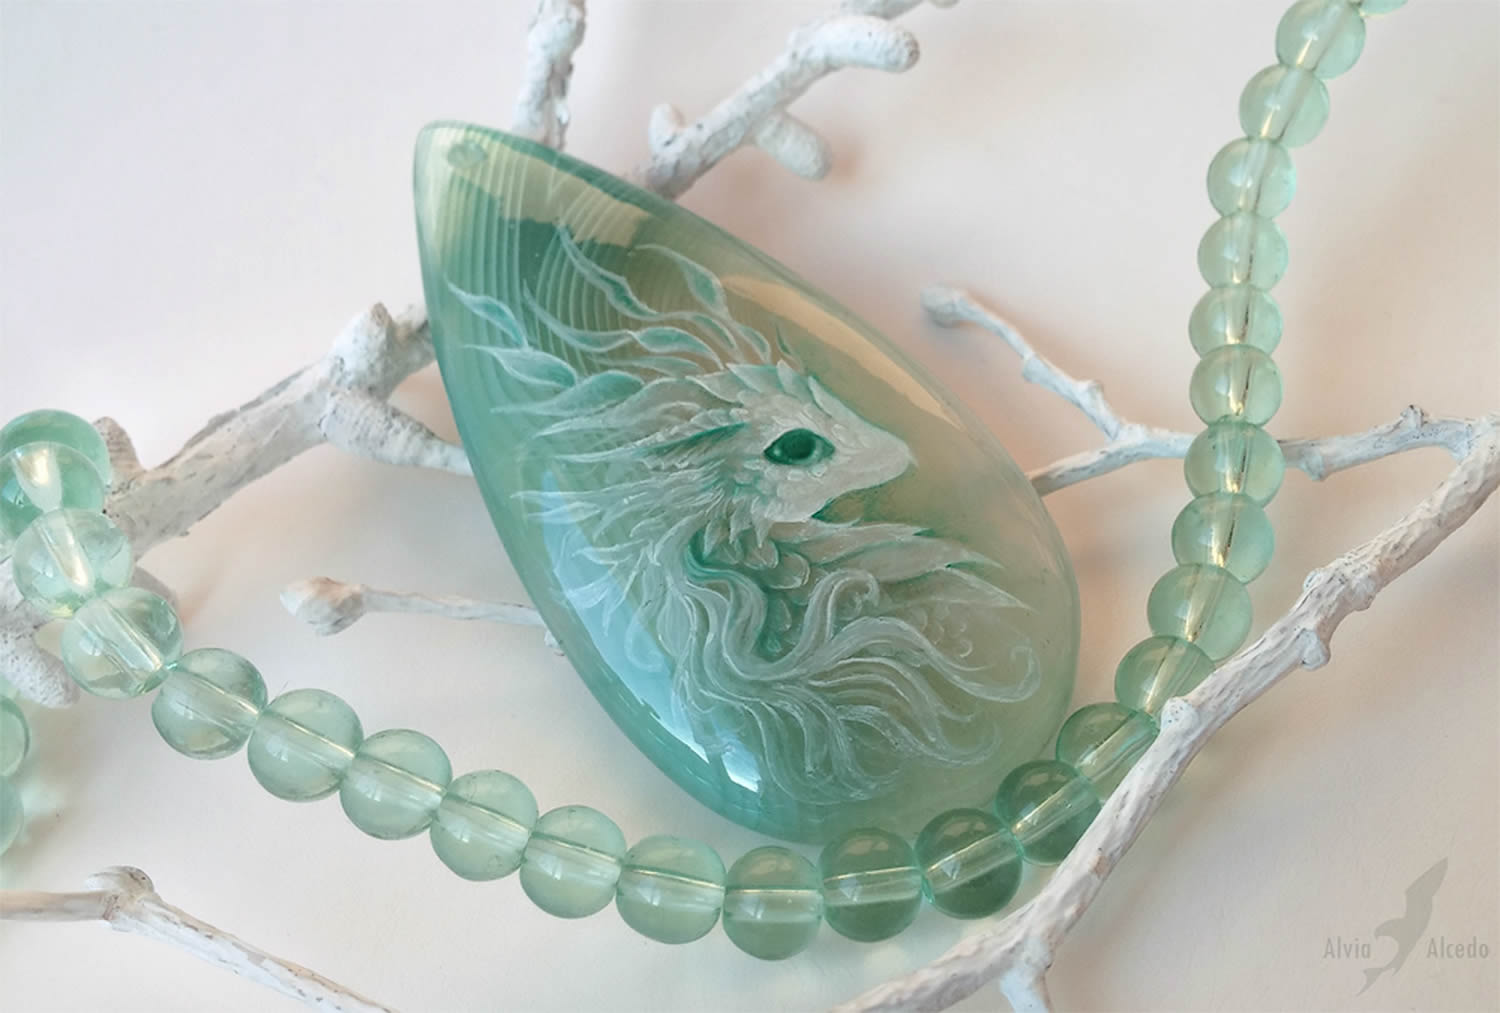 mint green stone with white fantasy creature